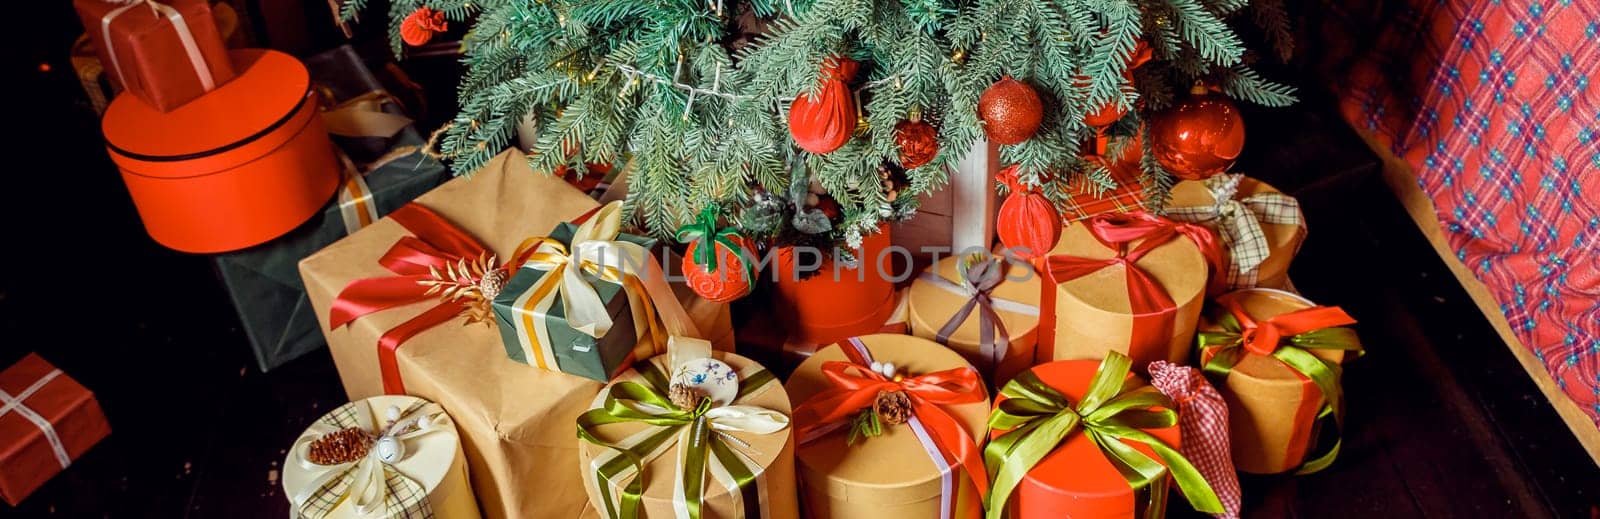 Christmas background with many gift boxes decorated with ribbon on floor under Christmas tree. Winter holidays concept. stack of Boxes with gifts under the Christmas tree by YuliaYaspe1979